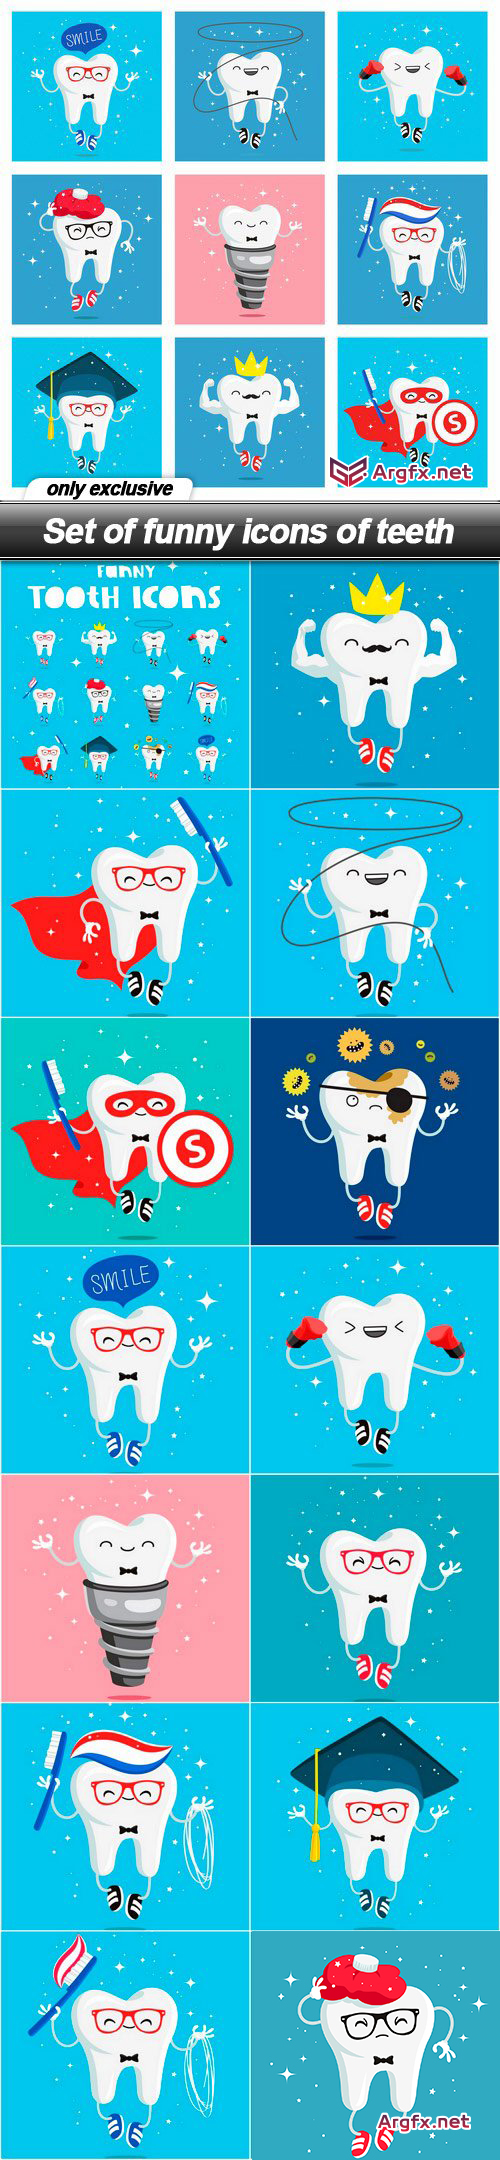  Set of funny icons of teeth - 15 EPS